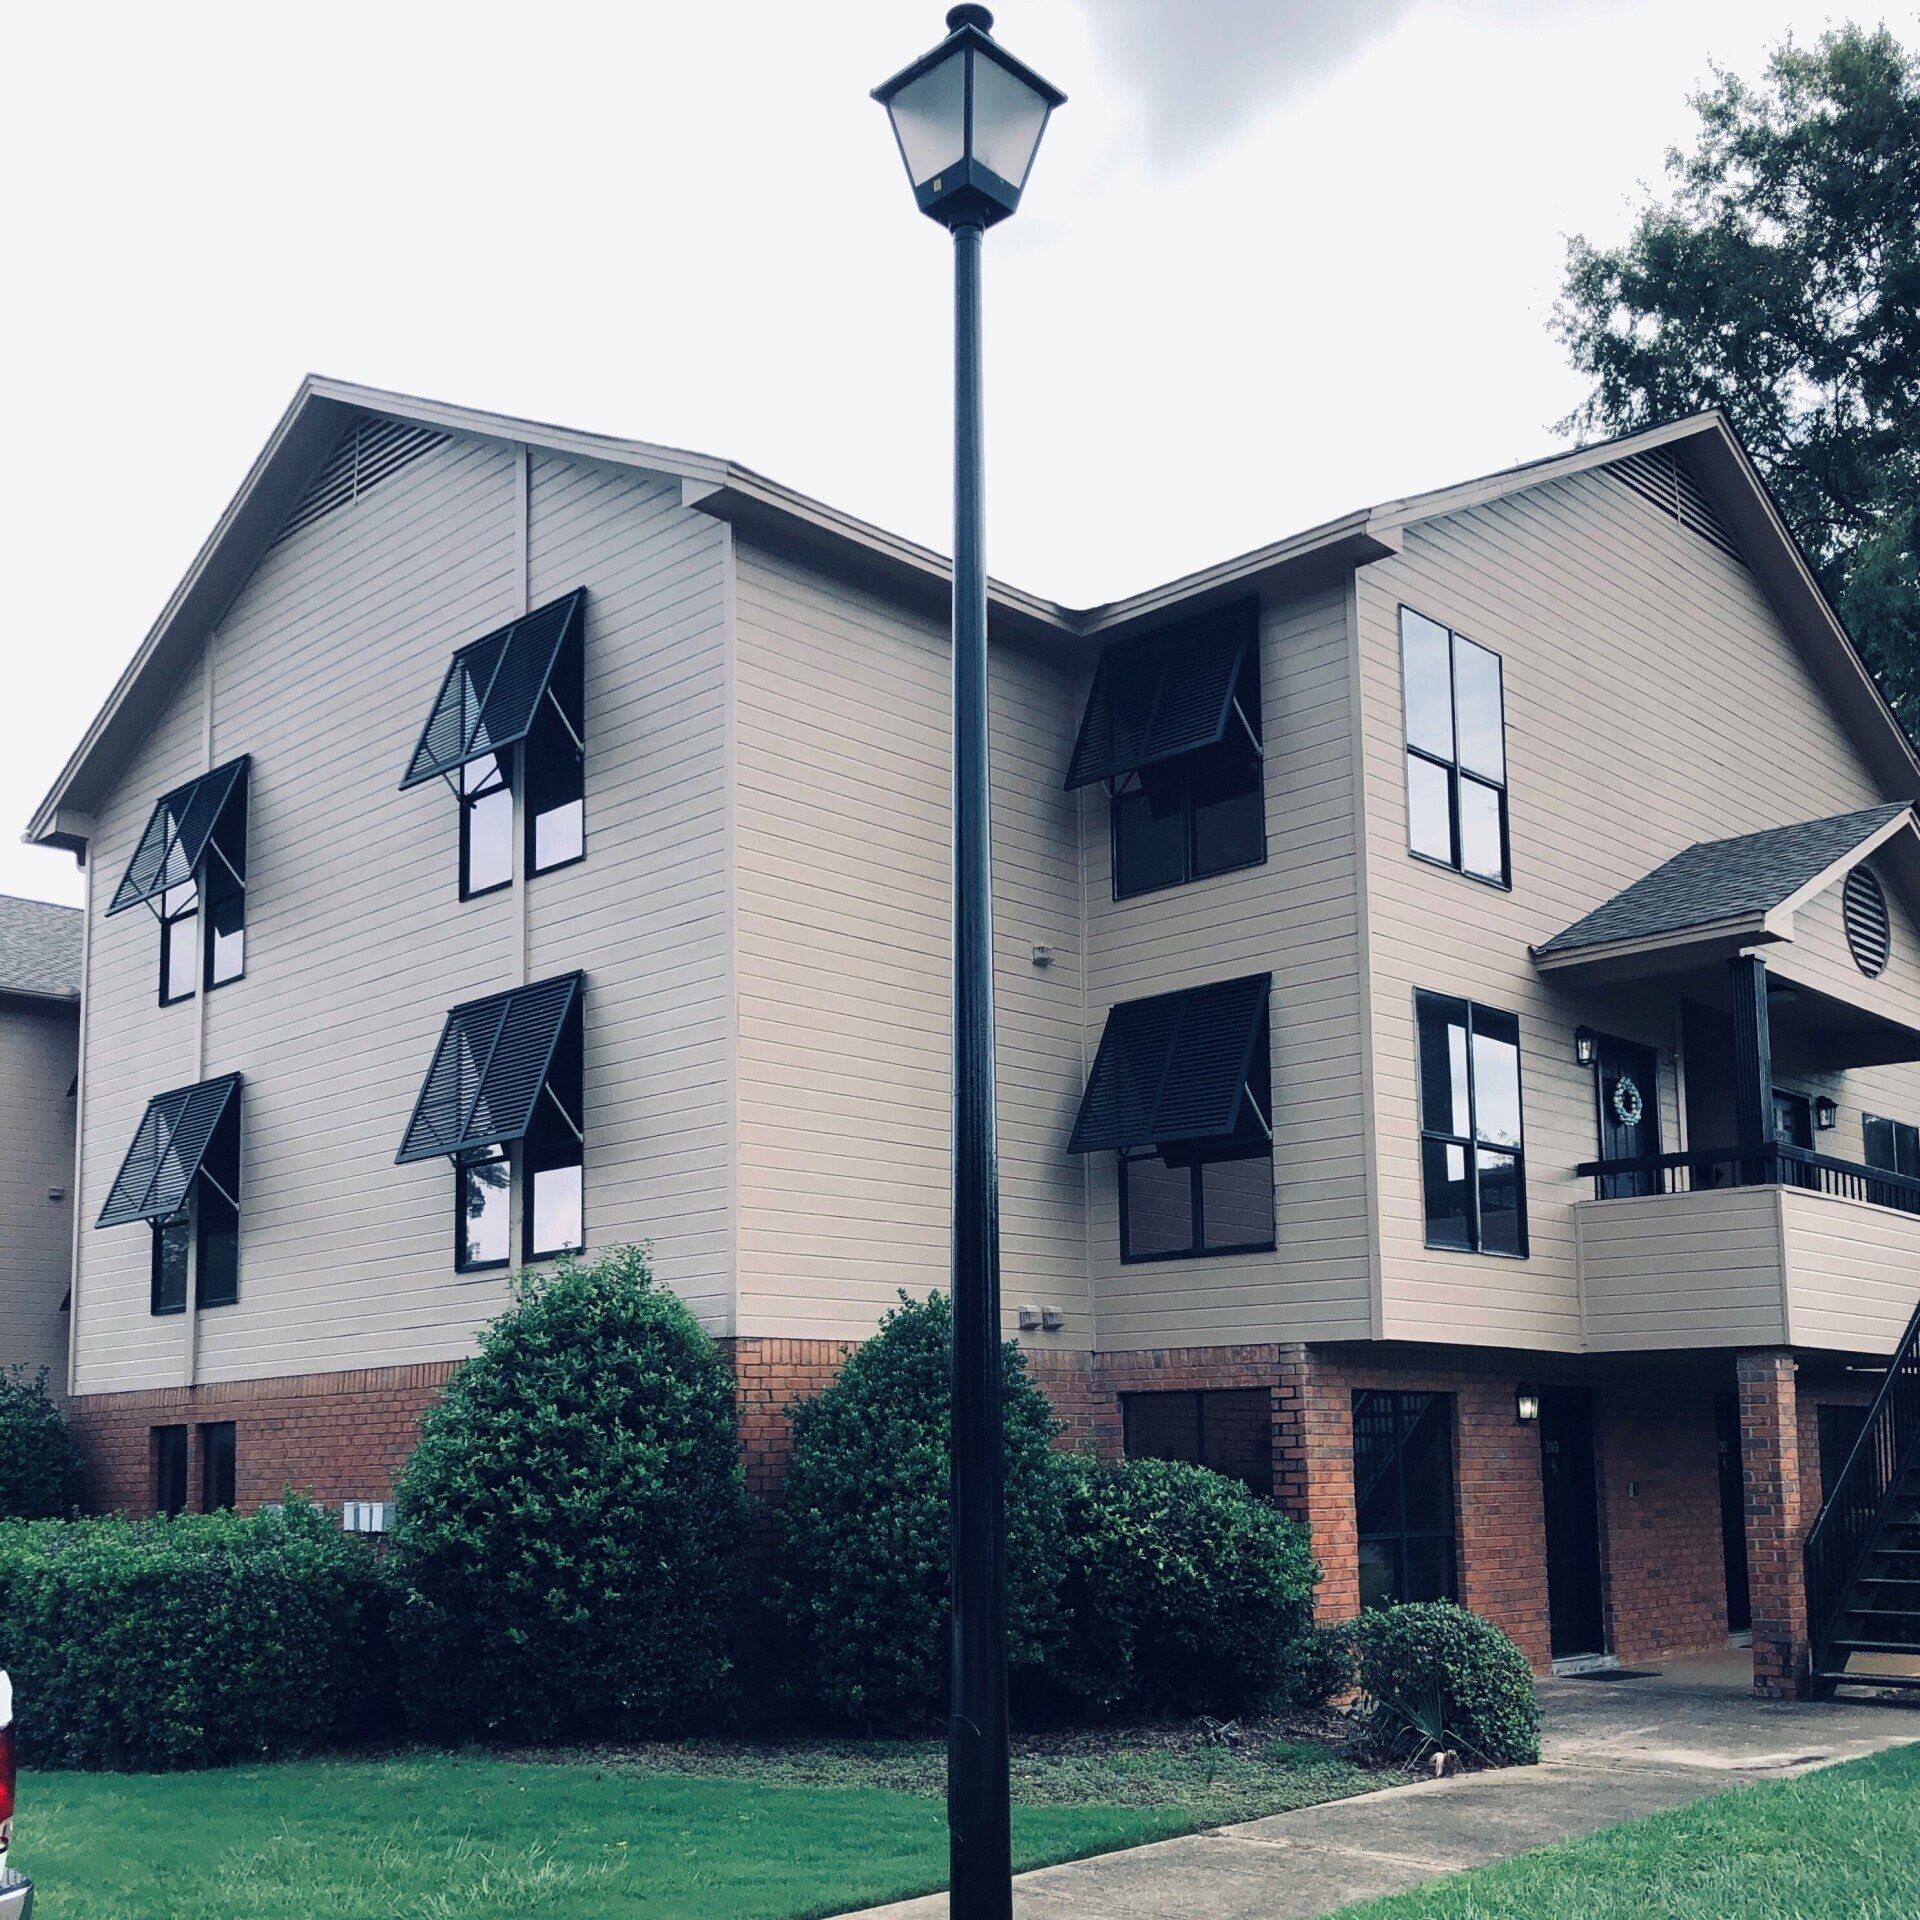 Home window tinting service - After 74% Heat Rejection & Storm Security was added with SPF Home Tint for building 3 of Arbors on Taylor apartments in AL